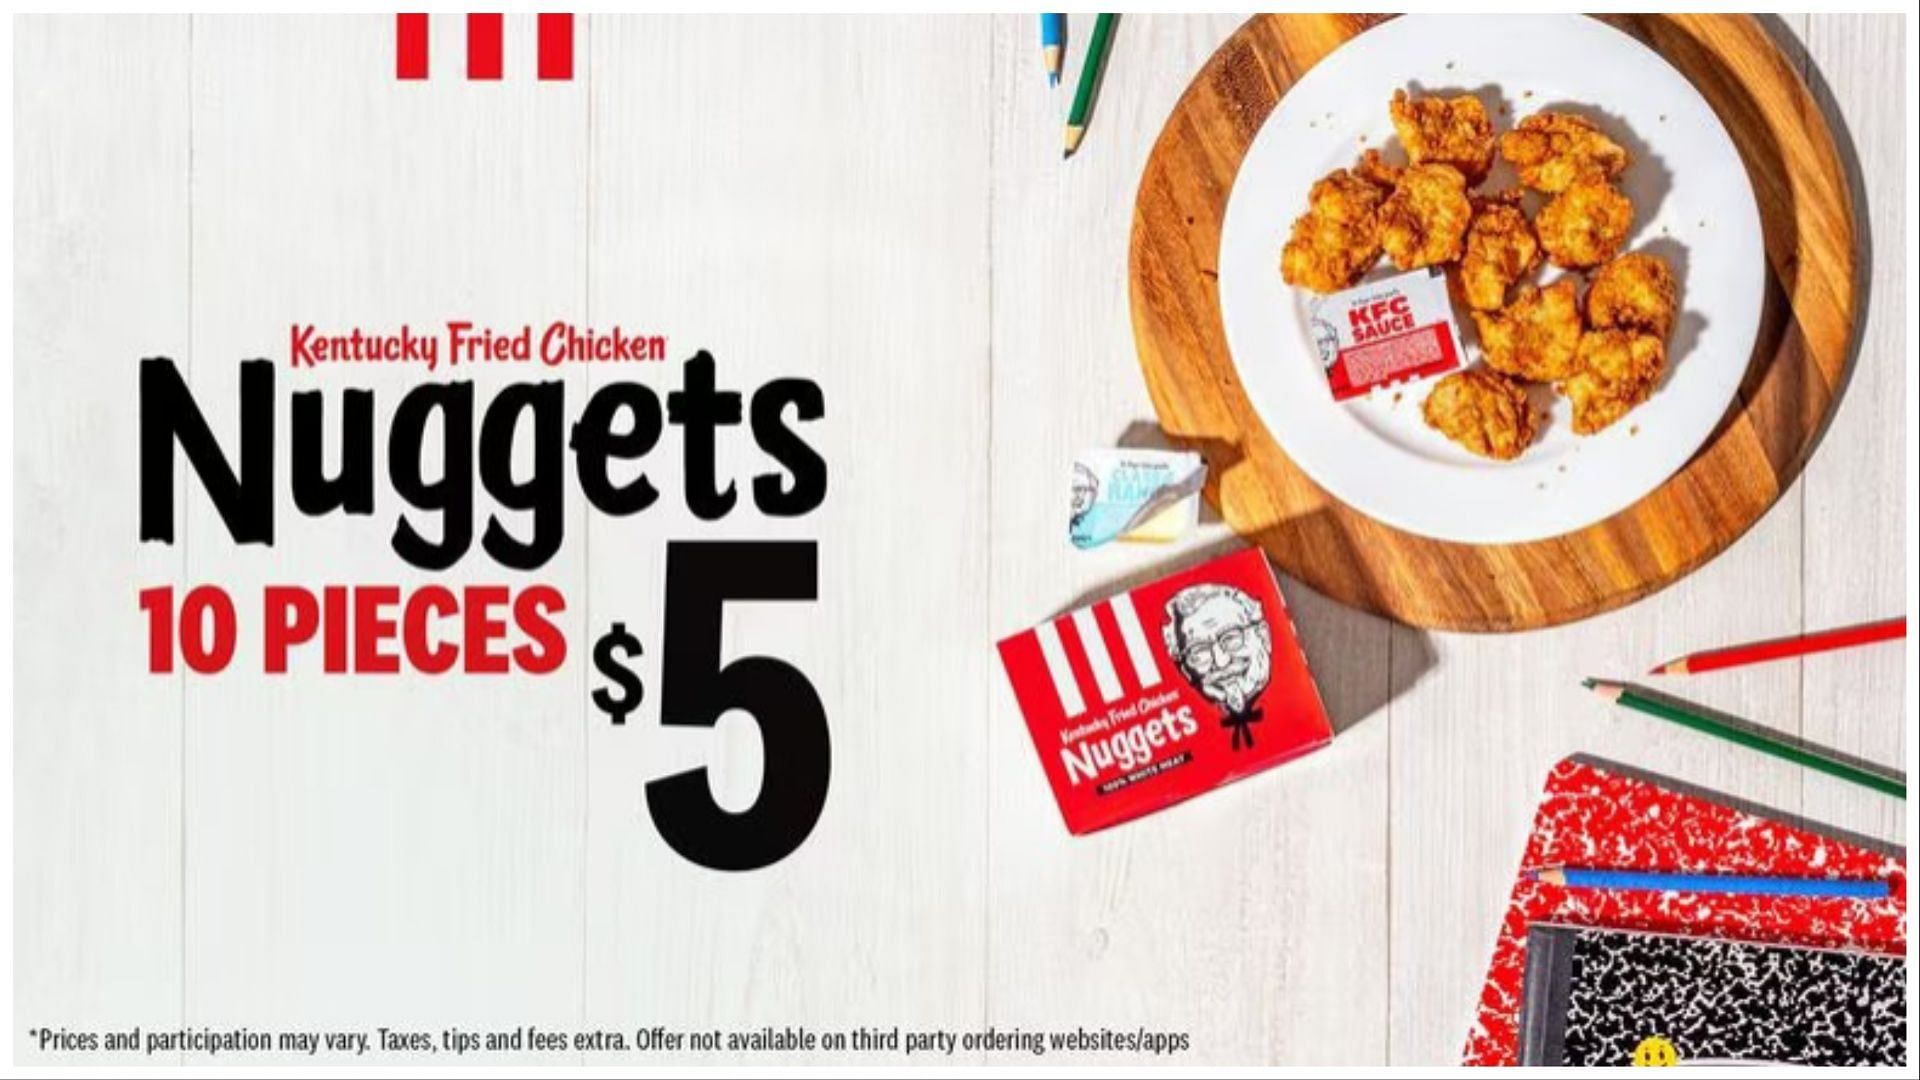 The brand is also offering nuggets (Image via KFC)